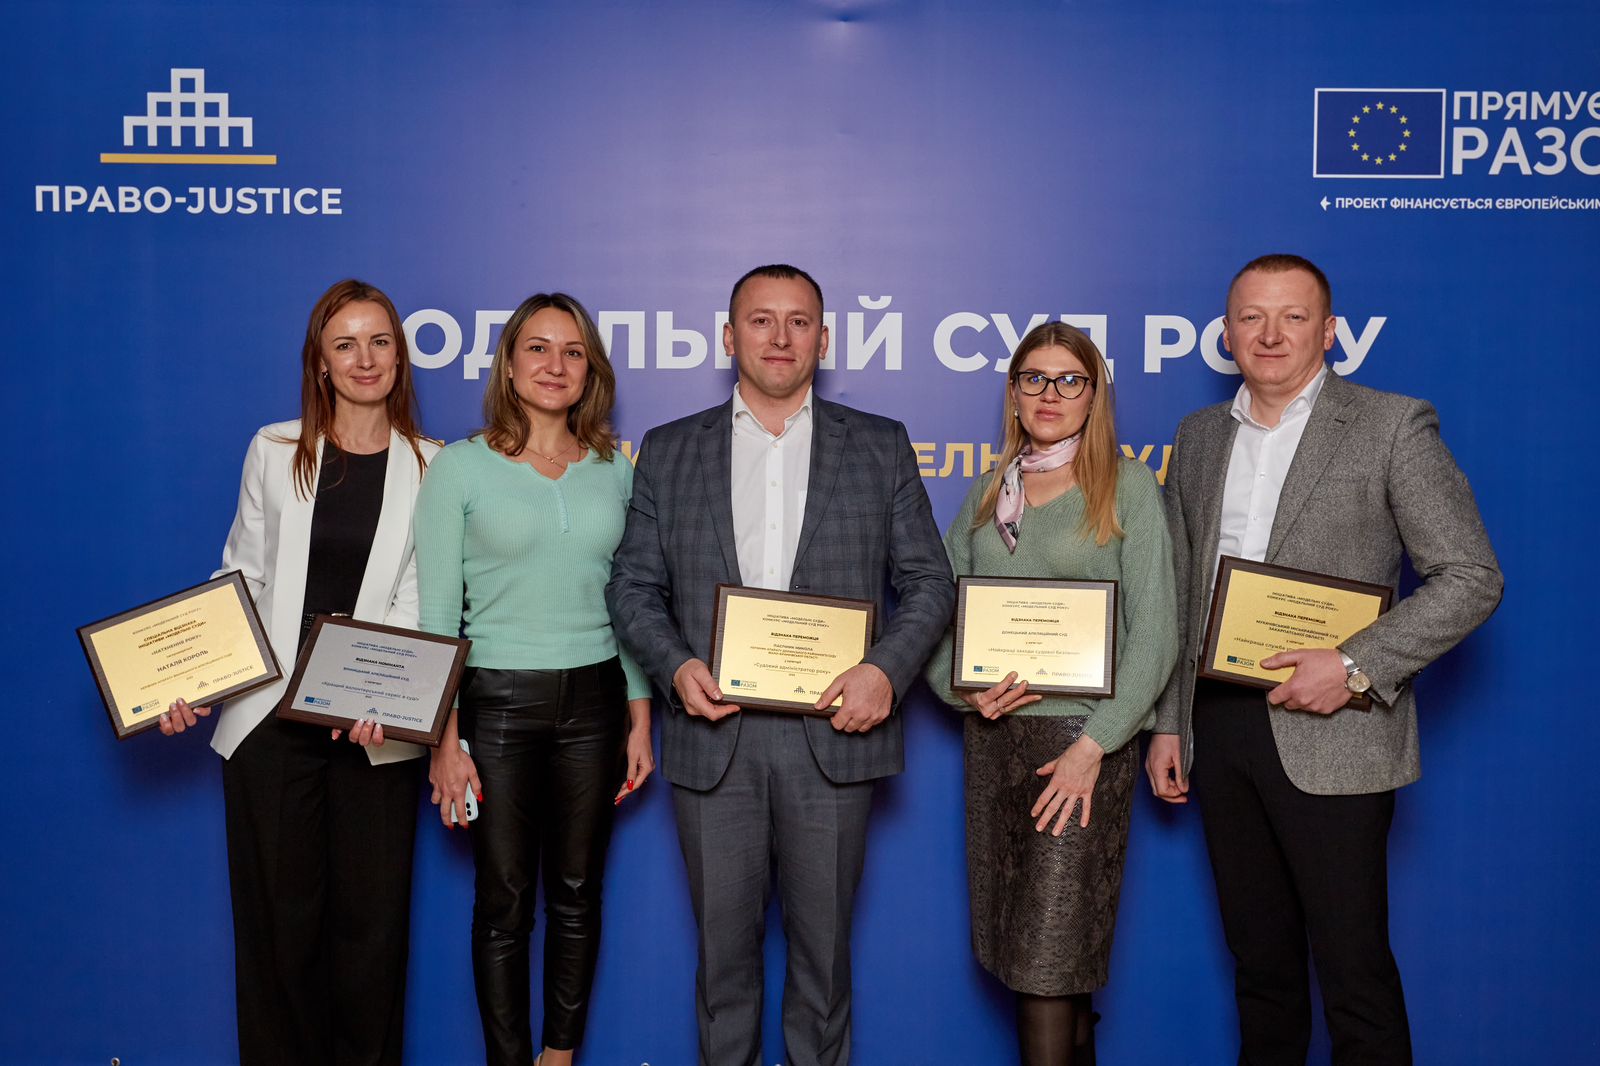 The EU Project Pravo-Justice aworded the winners of the "Model Court of the Year" competition